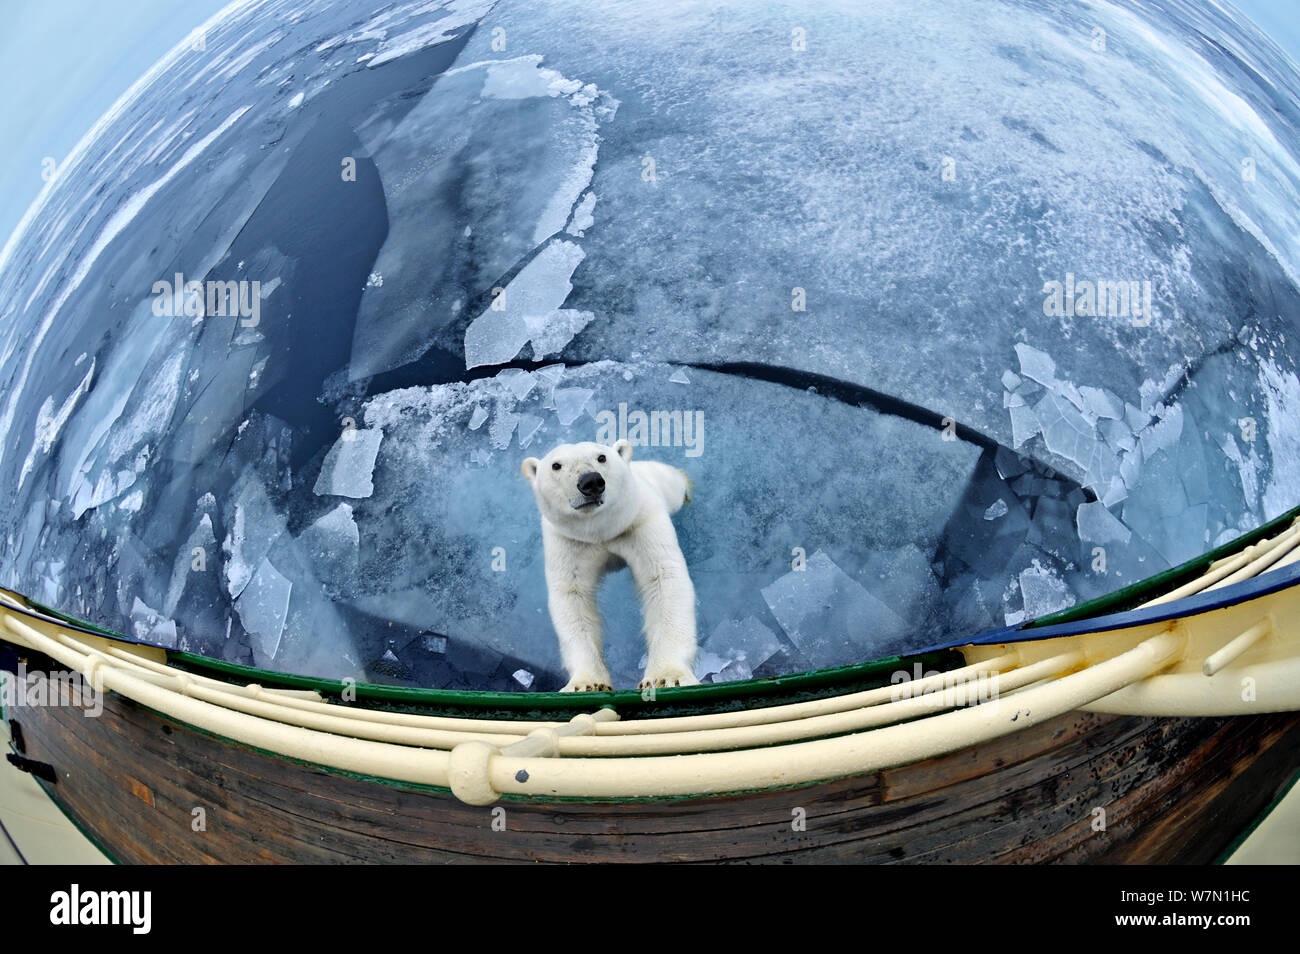 Polar bear (Ursus maritimus) standing against expedition ship, taken with extreme wide angle lens, Svalbard, Arctic September 2011 Stock Photo